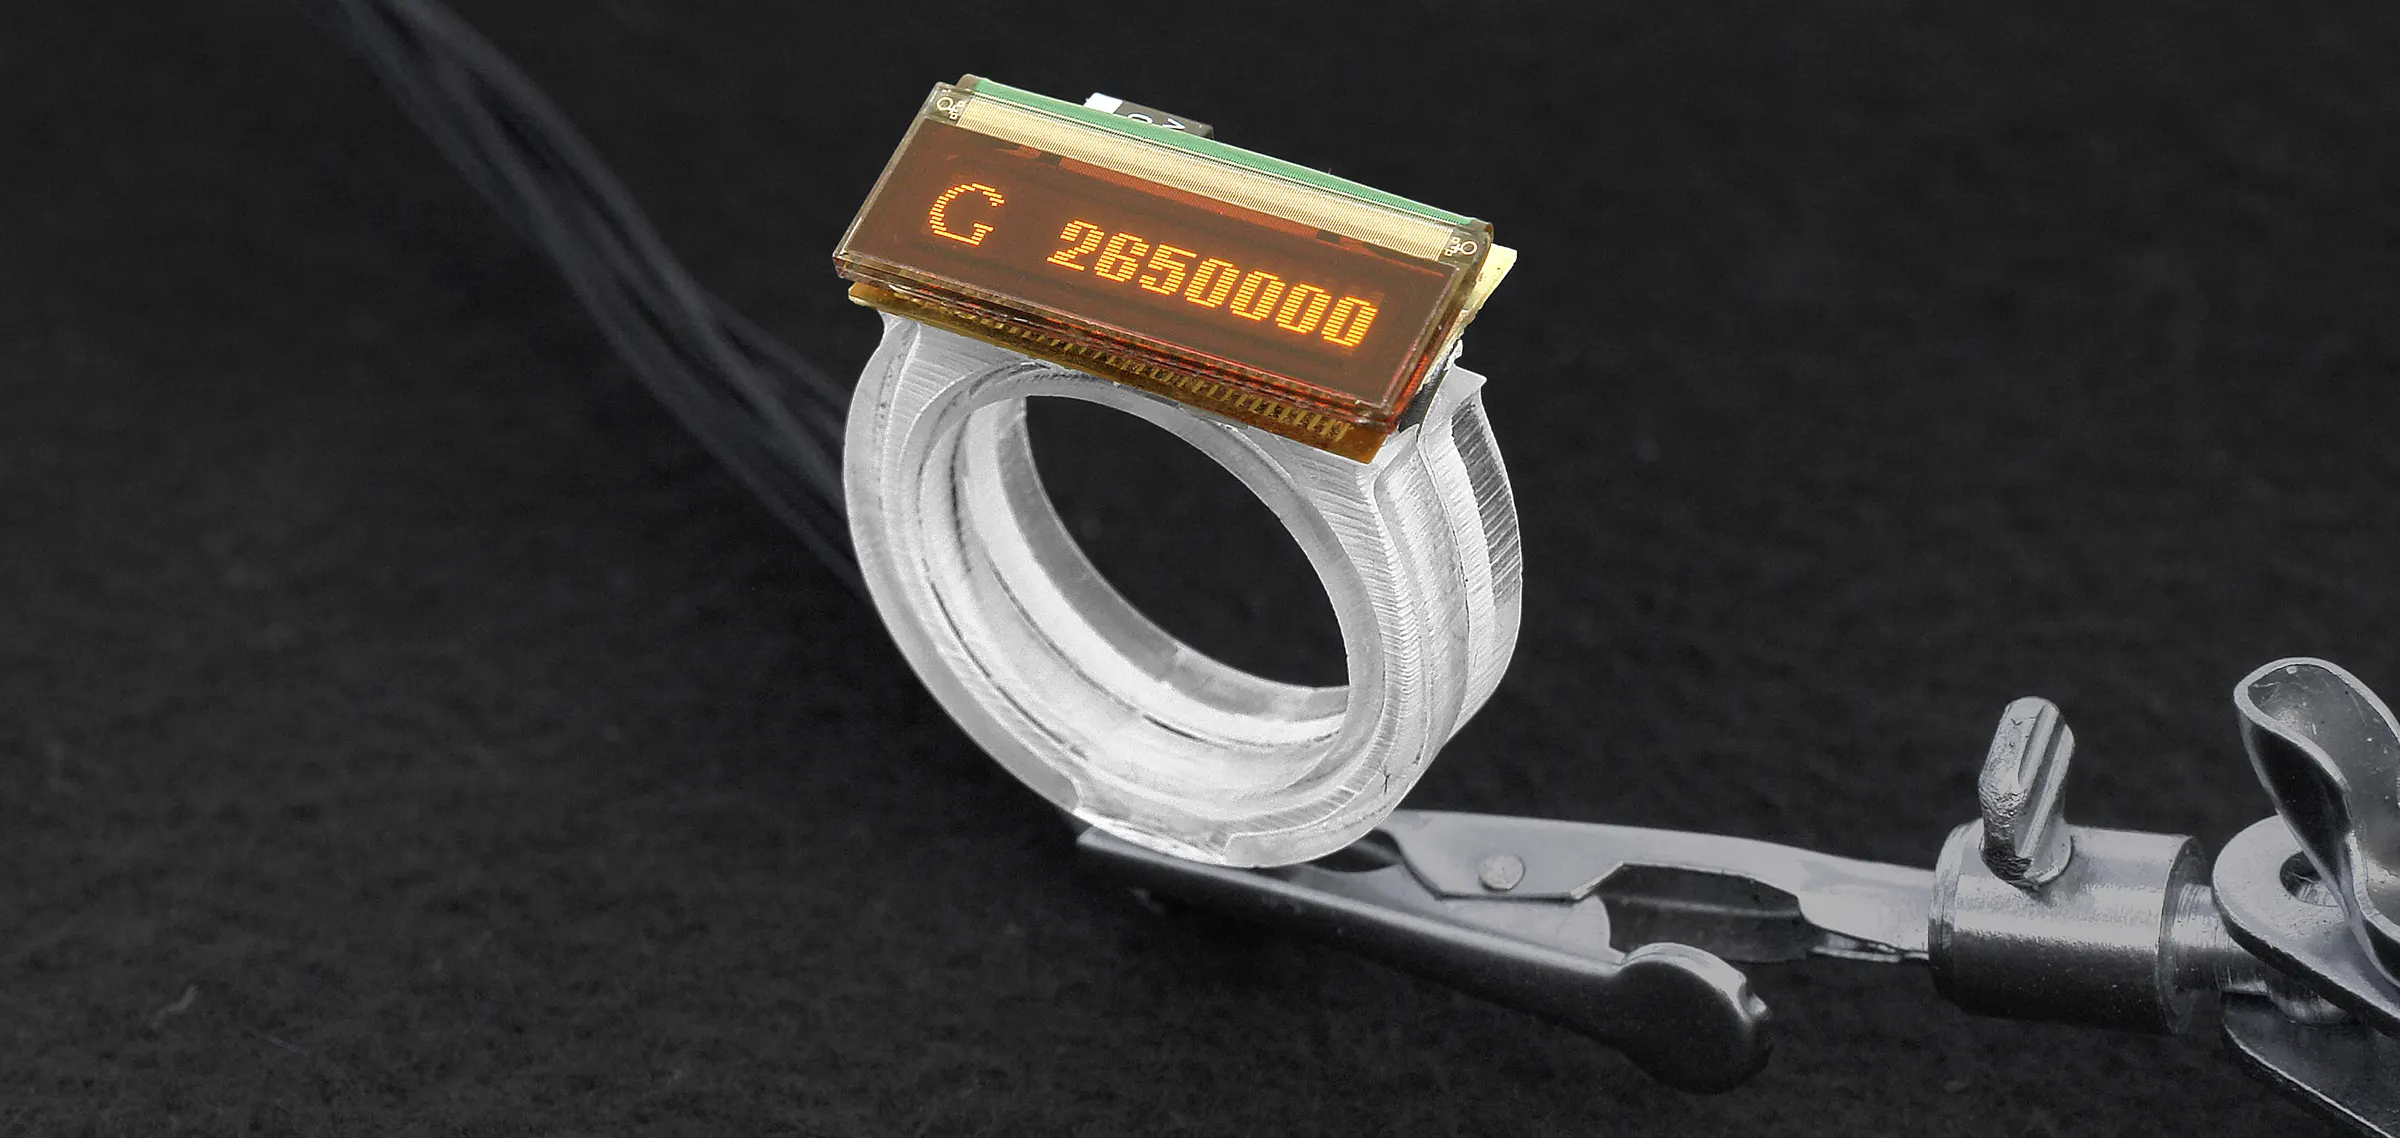 A glass ring with a small orange LED screen. The screen displays G2650000.